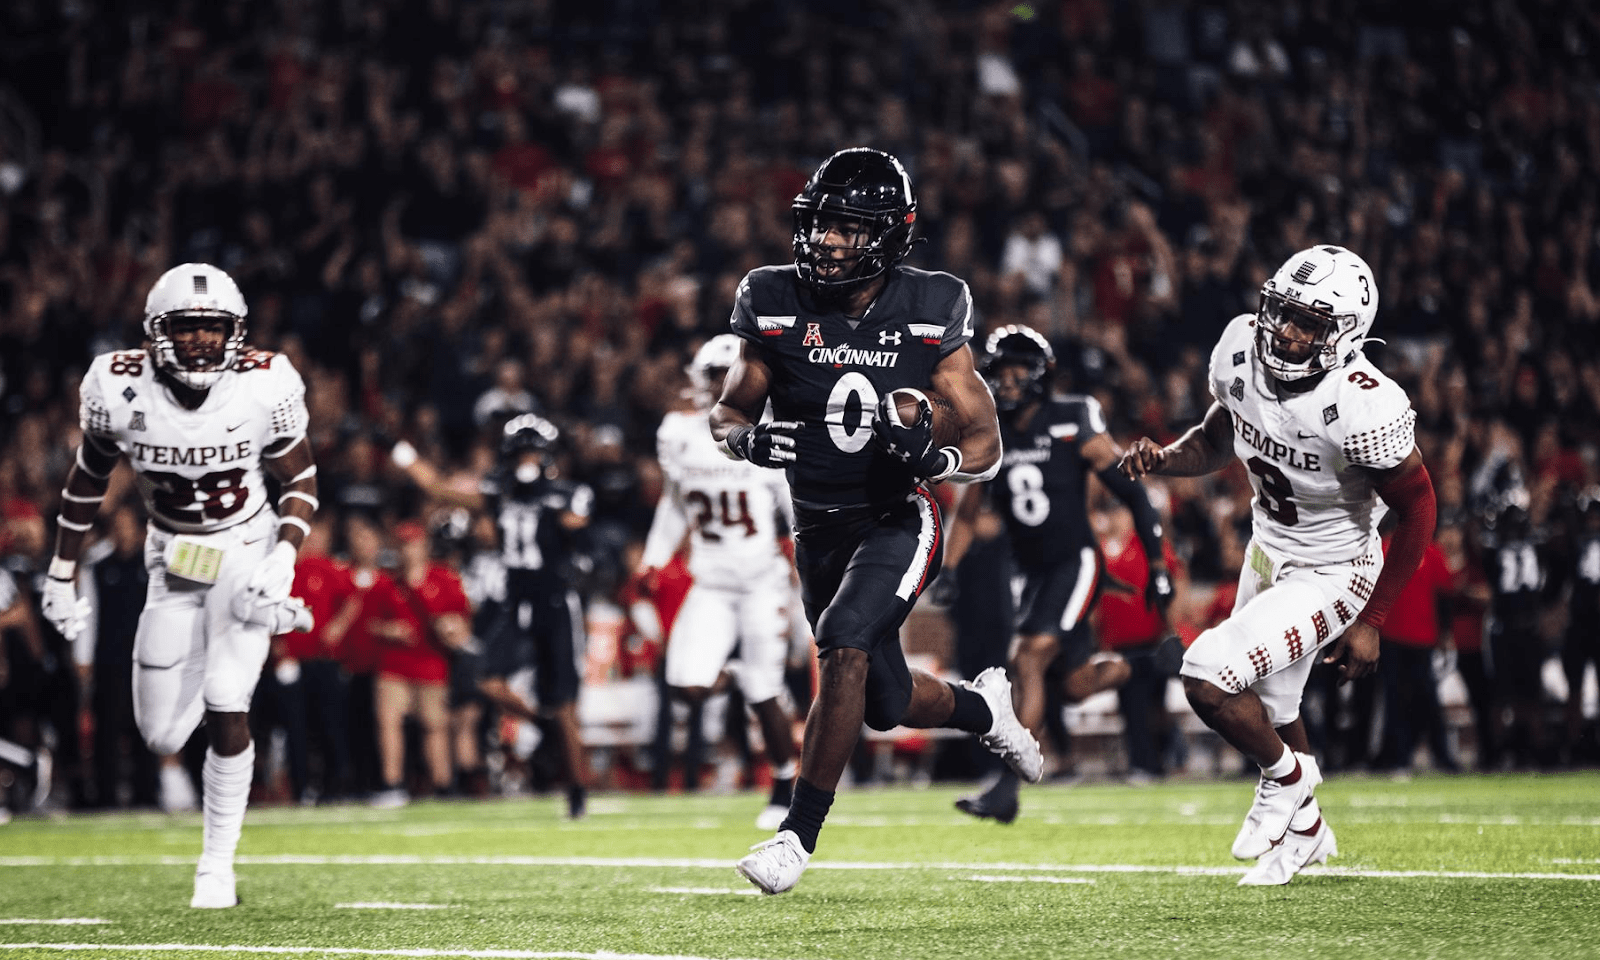 Charles McClelland possesses good overall ability in the Cincinnati Bearcat offense being a quality runner and great receiver. Hula Bowl scout Joel Titus breaks down the strengths and weaknesses of McClelland as an NFL Prospect in this article.